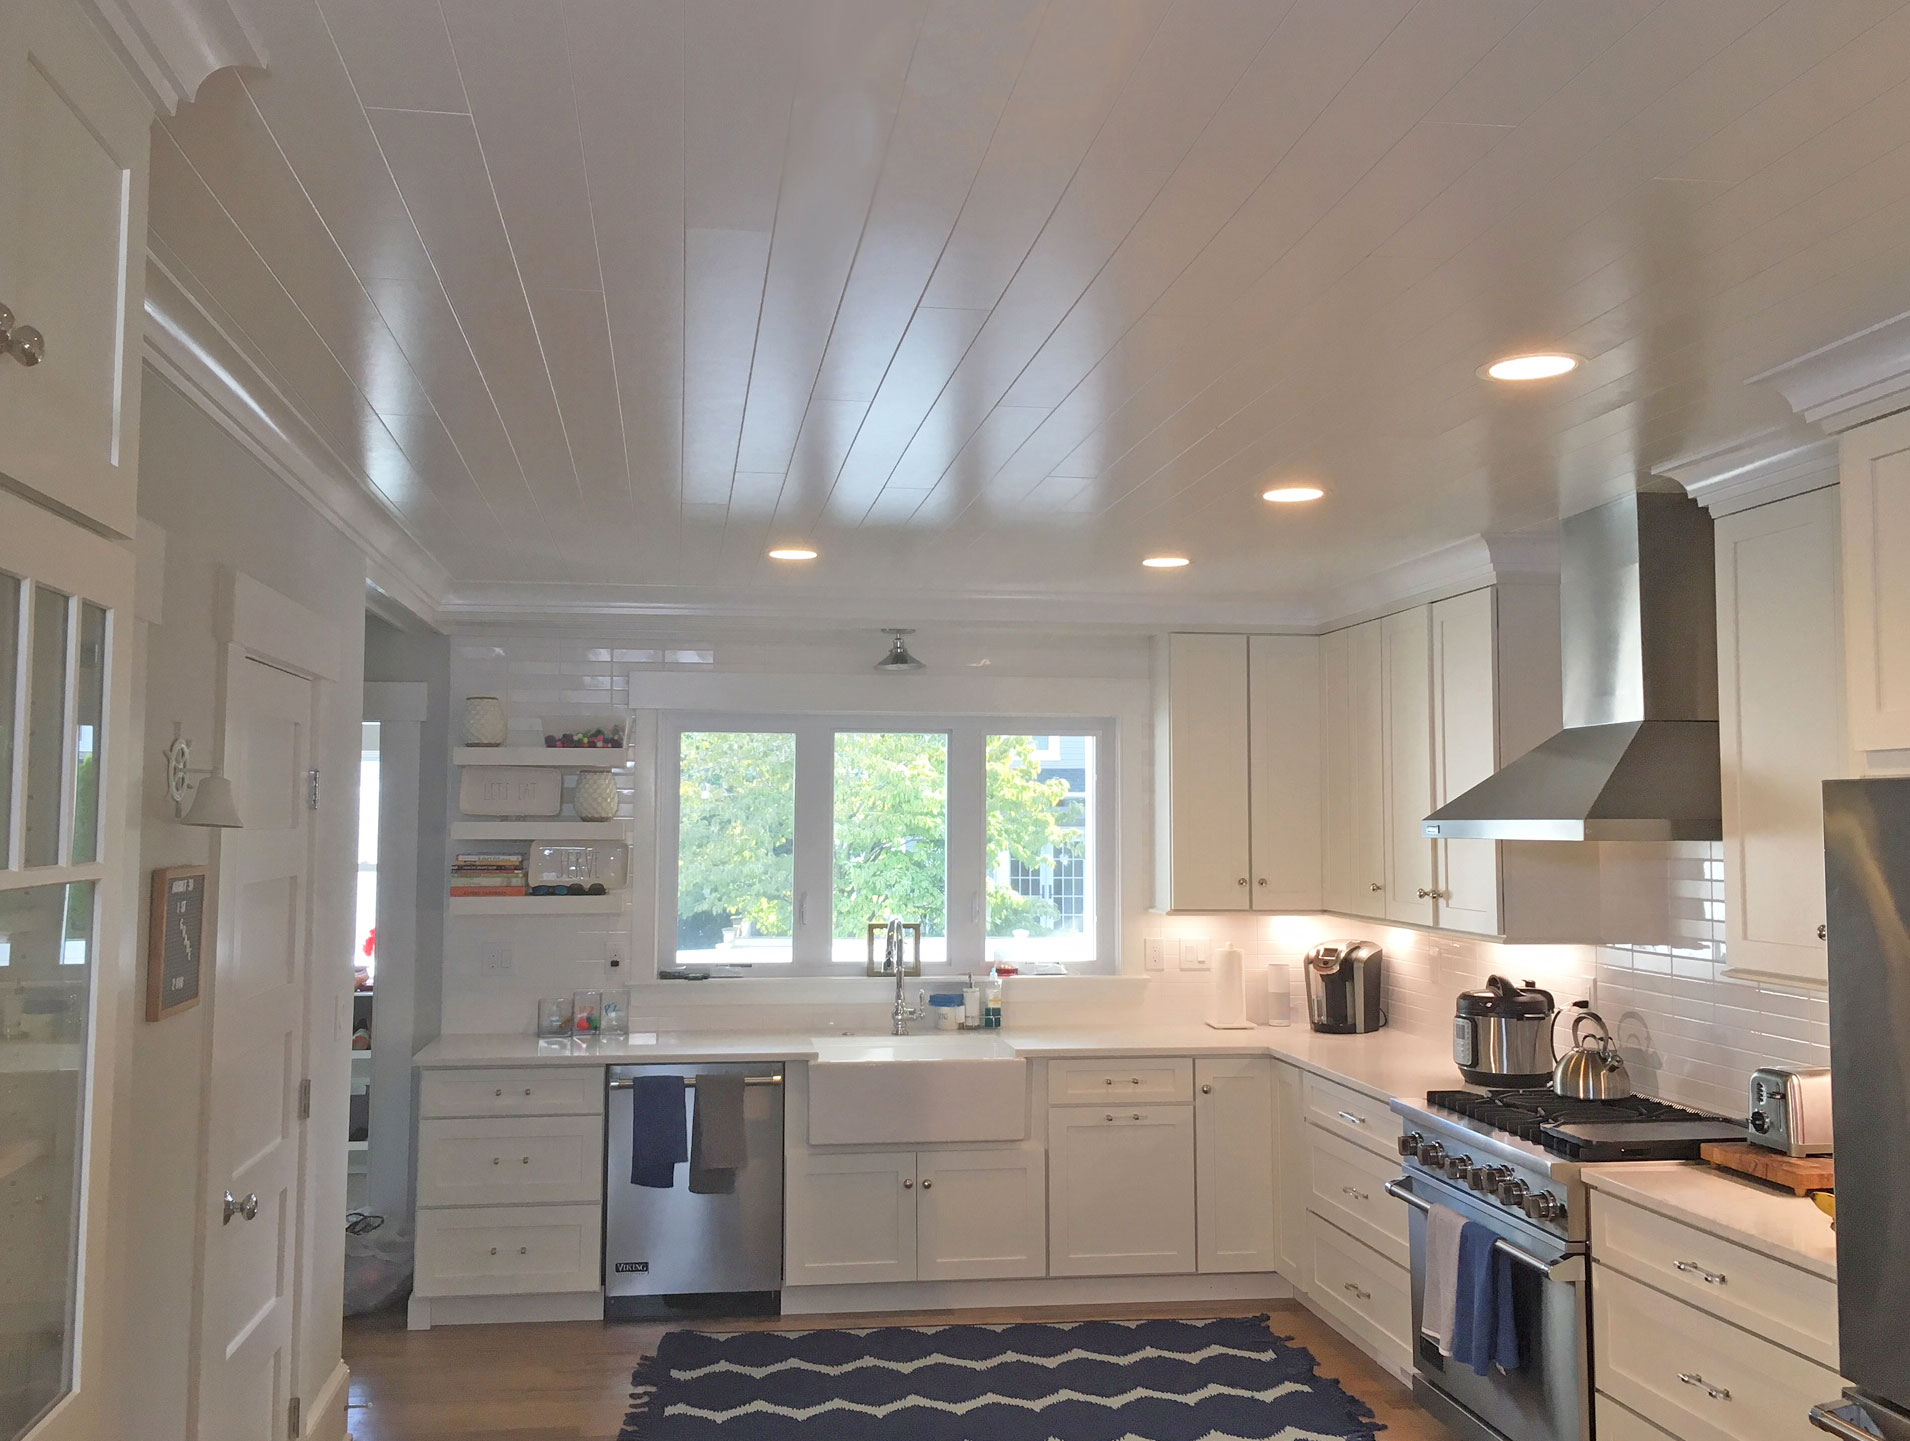 This Handsome Wood-Look Plank Ceiling Easily Installs Over Nearly Any Existing Surface - screenshot